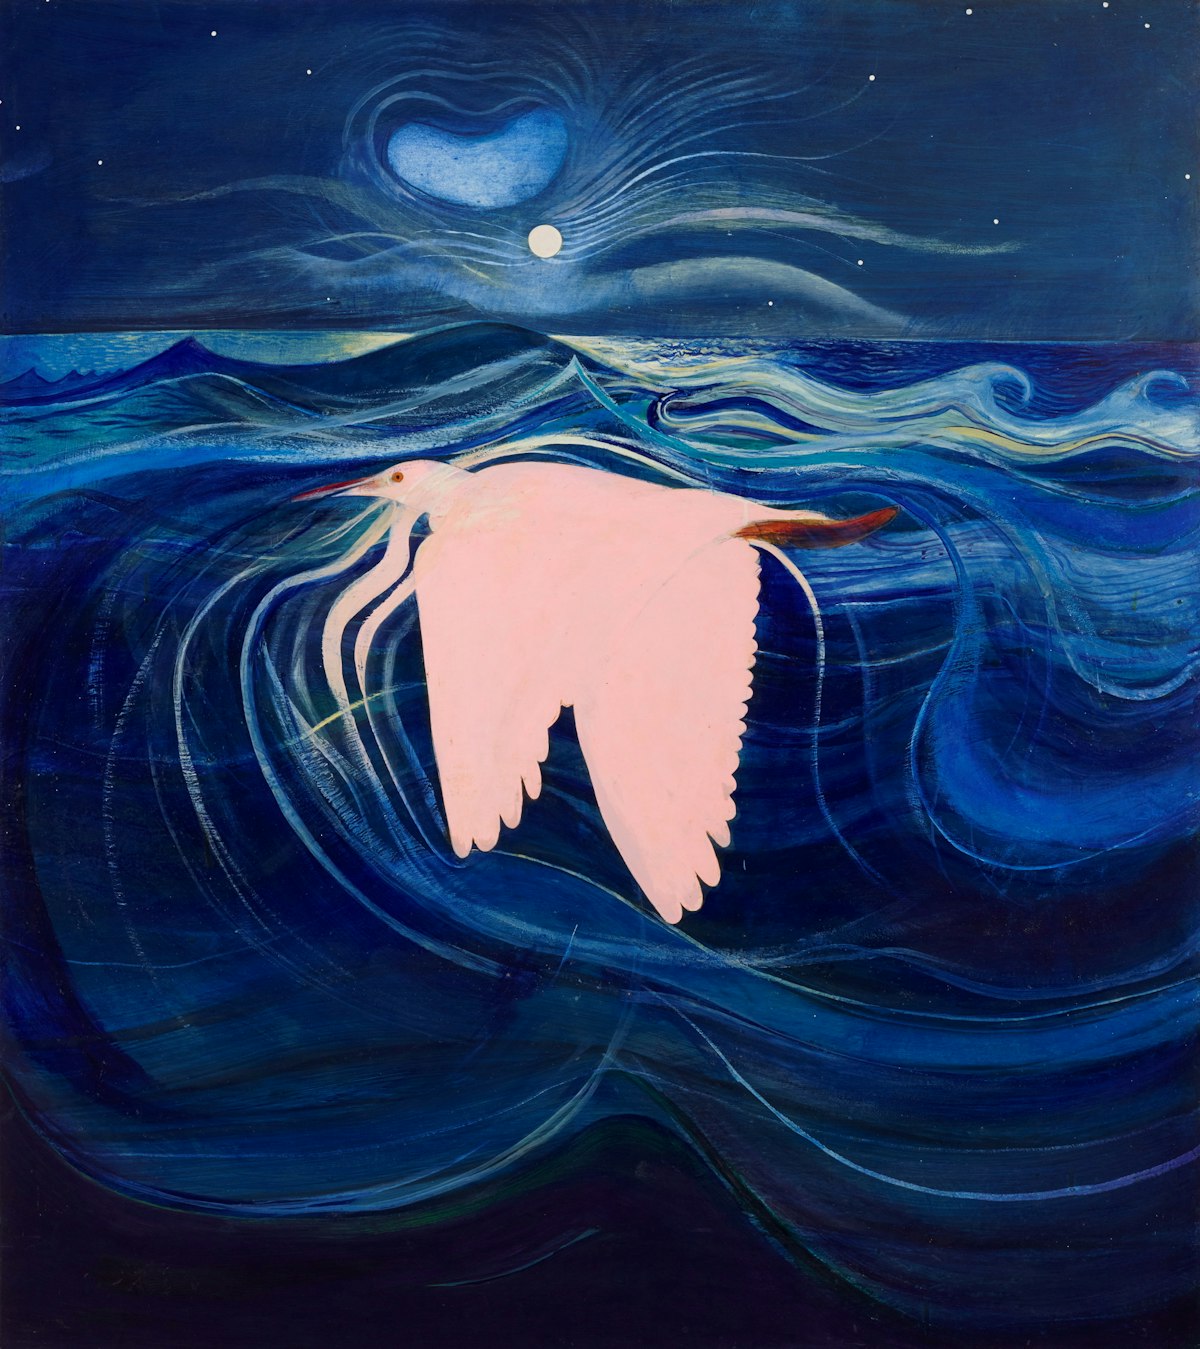 Brett Whiteley The pink heron 1969. Art Gallery of New South Wales, Gift of Patrick White 1979 © Wendy Whiteley